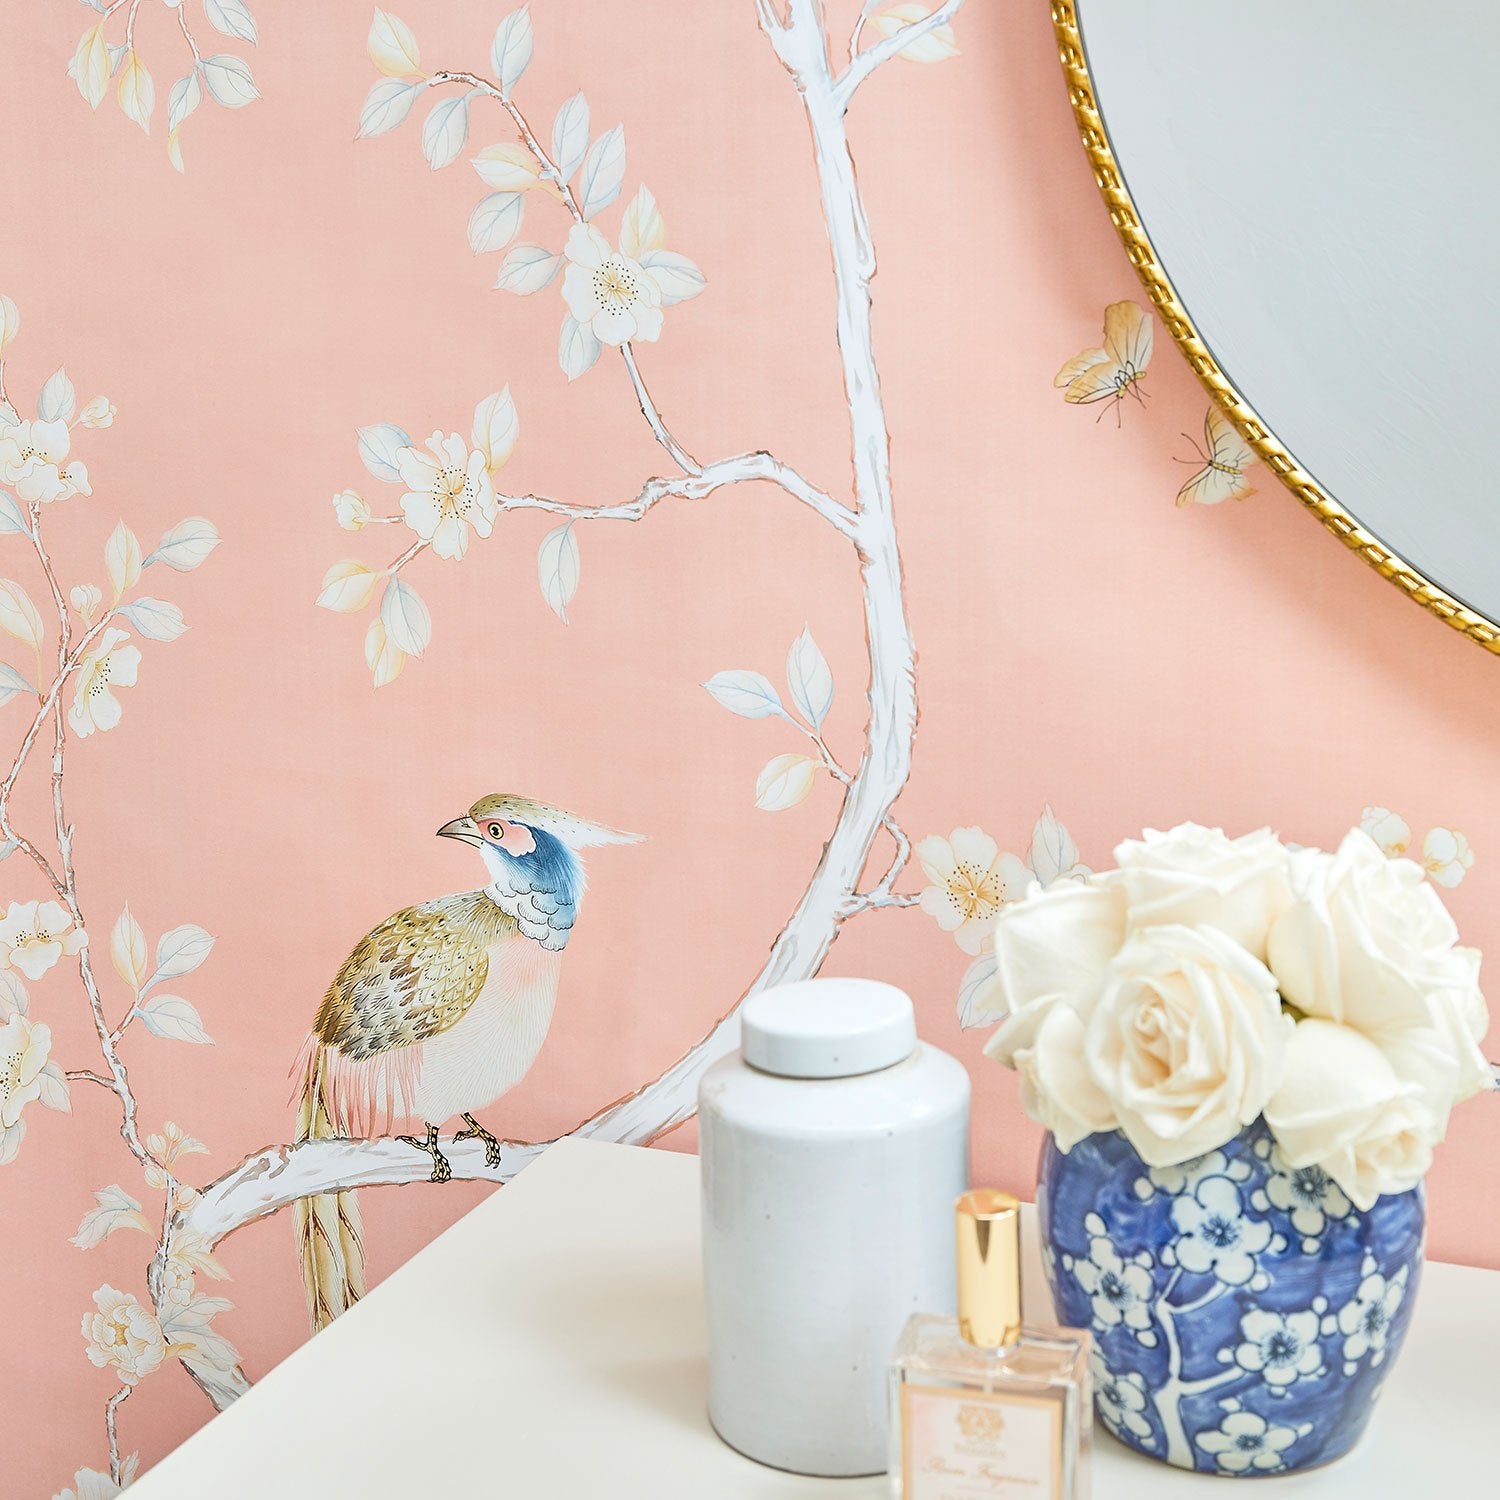 Traditional Chinoiserie Carlisle Wallpaper Mural in Coral Detail of Bird